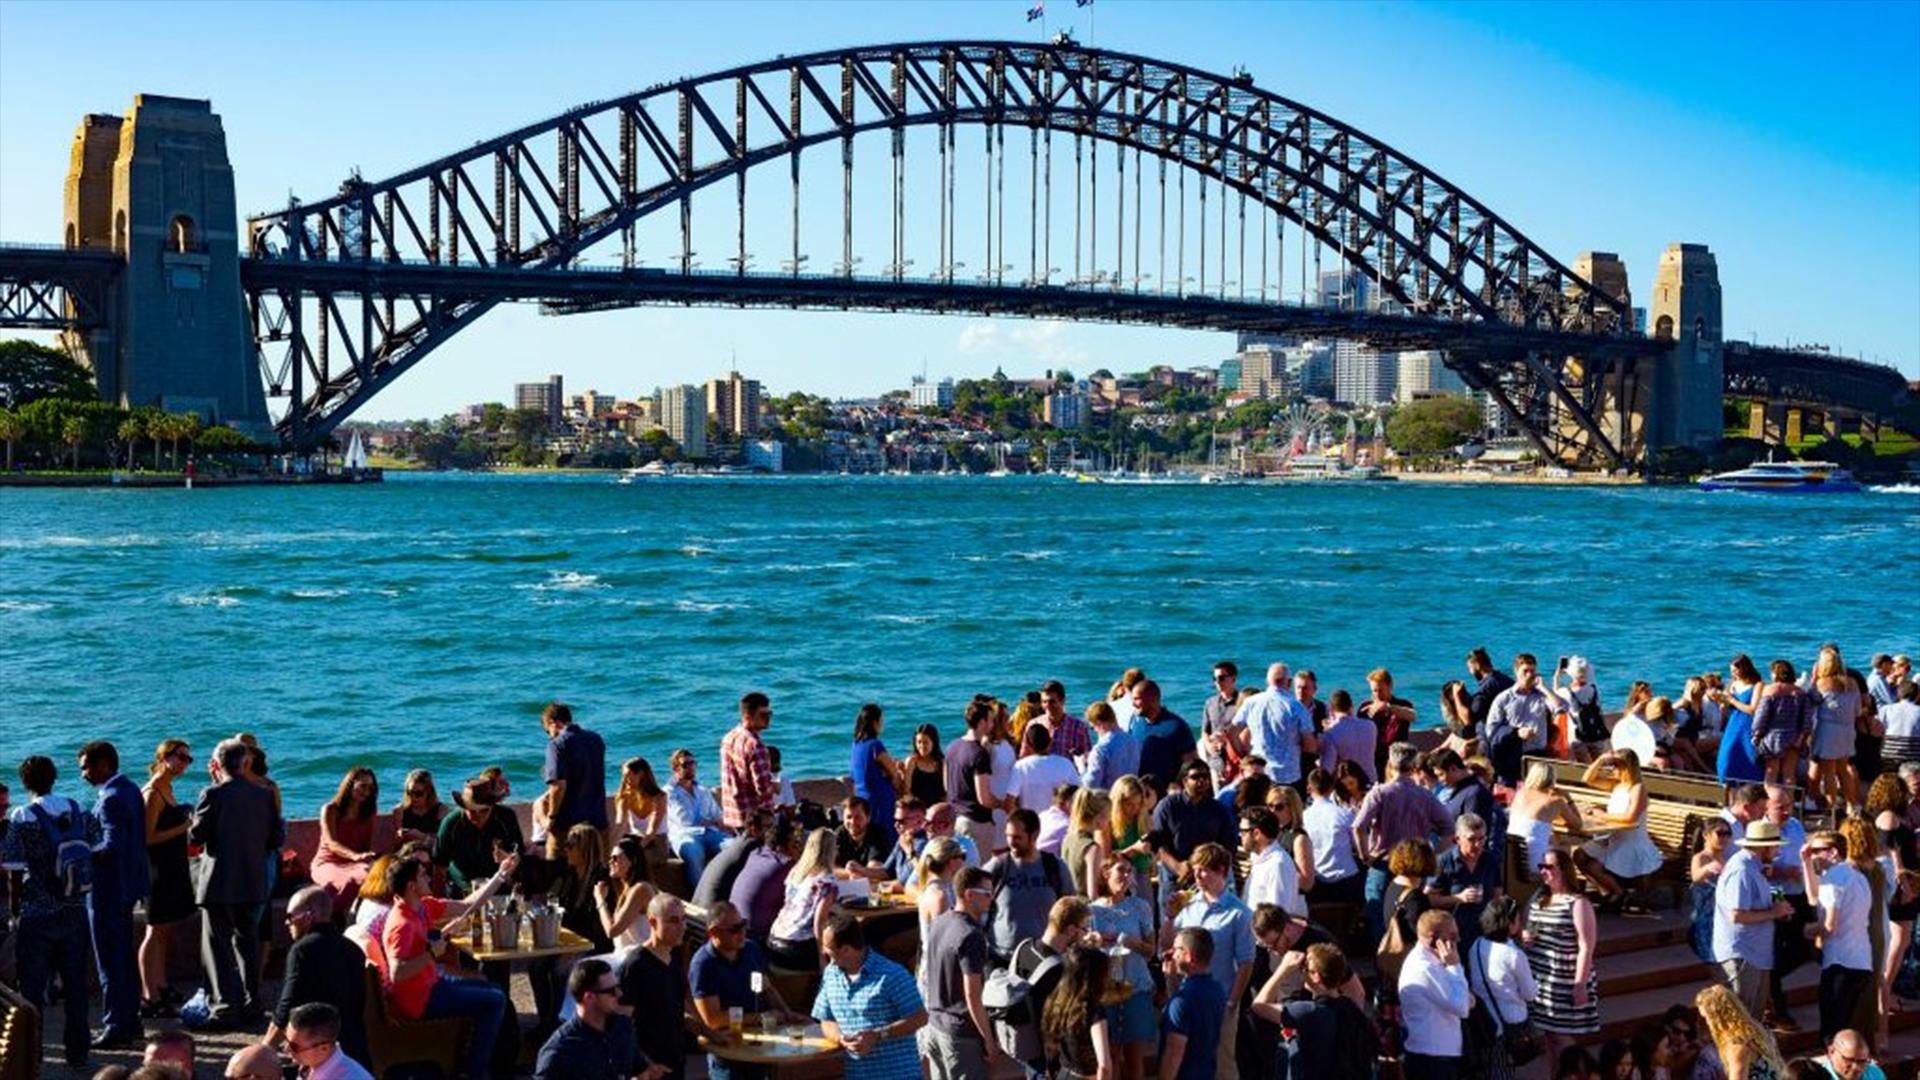 In 2028, a total solar eclipse will occur over Sydney Harbor.